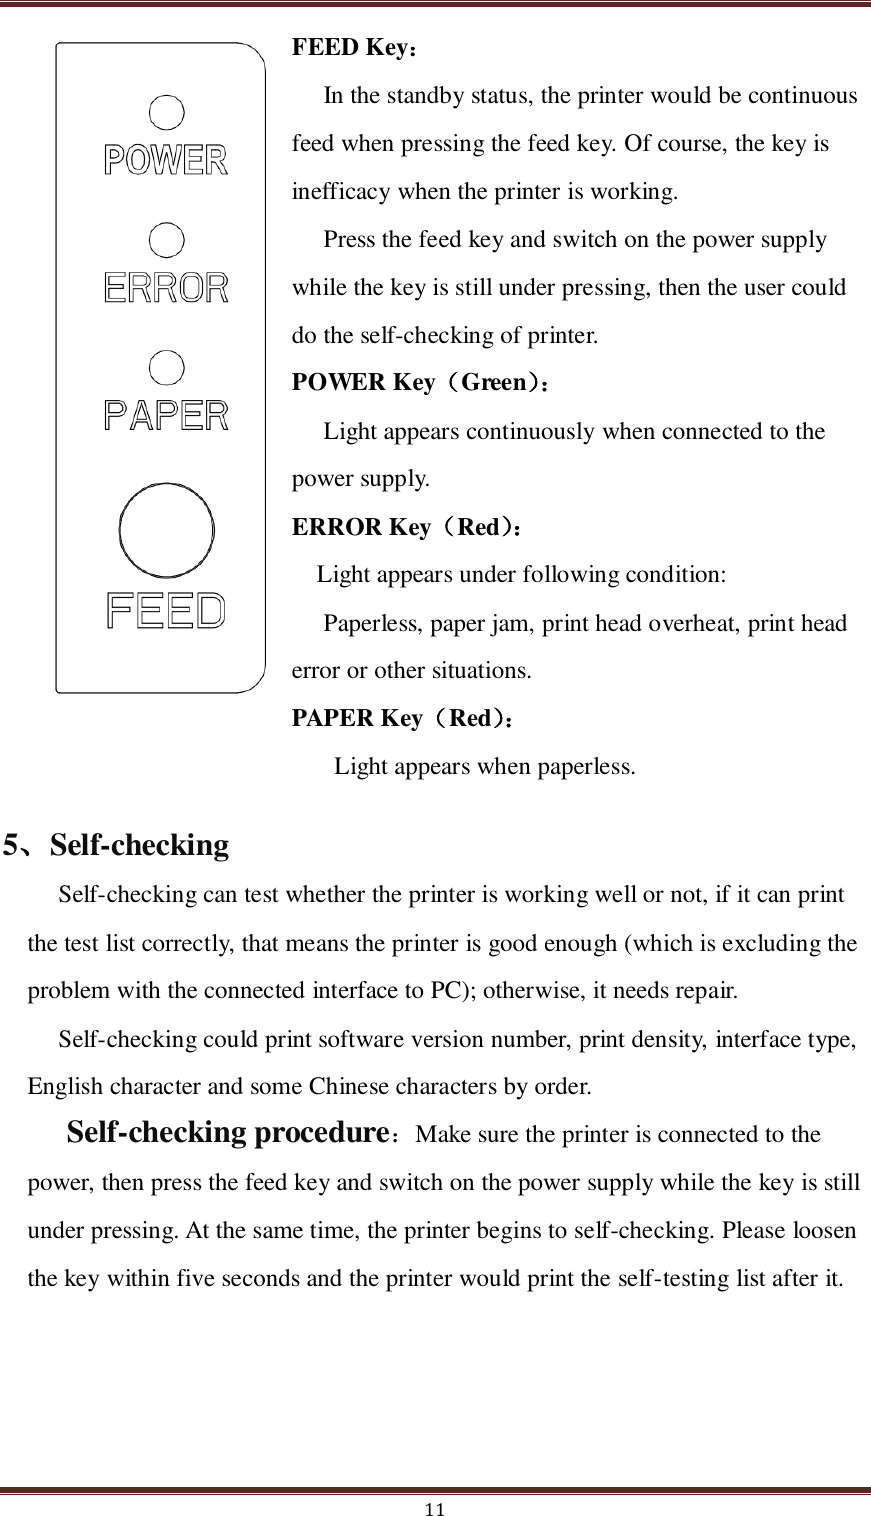  11 FEED Key：   In the standby status, the printer would be continuous feed when pressing the feed key. Of course, the key is inefficacy when the printer is working. Press the feed key and switch on the power supply while the key is still under pressing, then the user could do the self-checking of printer. POWER Key（Green）：  Light appears continuously when connected to the power supply. ERROR Key（Red）：   Light appears under following condition:   Paperless, paper jam, print head overheat, print head error or other situations. PAPER Key（Red）：    Light appears when paperless. 5、Self-checking Self-checking can test whether the printer is working well or not, if it can print the test list correctly, that means the printer is good enough (which is excluding the problem with the connected interface to PC); otherwise, it needs repair.   Self-checking could print software version number, print density, interface type, English character and some Chinese characters by order. Self-checking procedure：Make sure the printer is connected to the power, then press the feed key and switch on the power supply while the key is still under pressing. At the same time, the printer begins to self-checking. Please loosen the key within five seconds and the printer would print the self-testing list after it. 